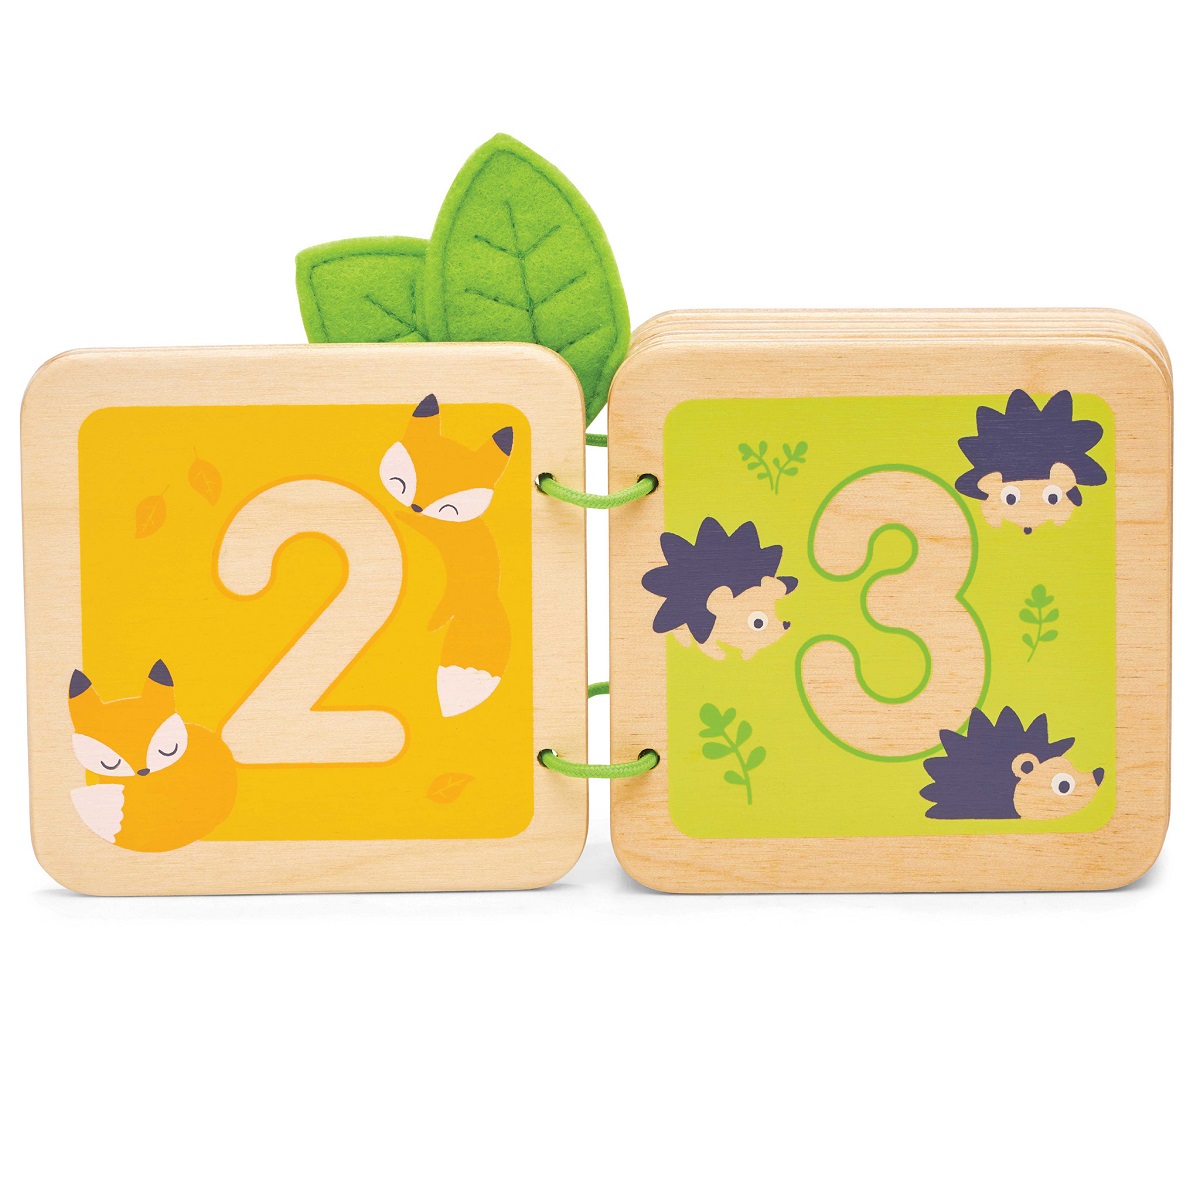 Baby and Toddler - 123 Numbers Wooden Book